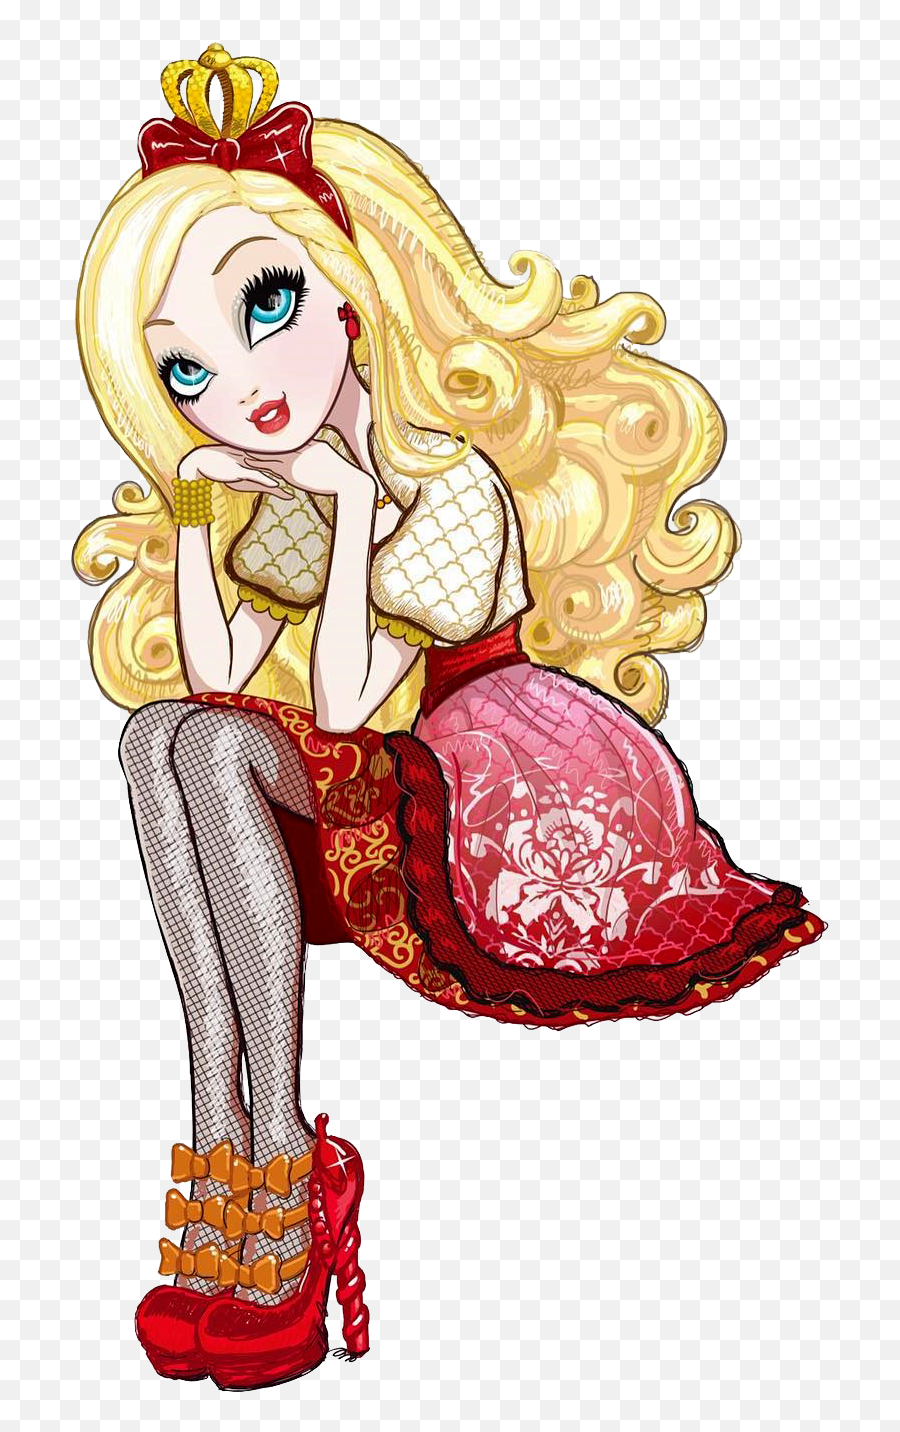 Drawing Apple Once Upon Time - Apple White Ever After High Shoes Emoji,Johnny Appleseed Clipart